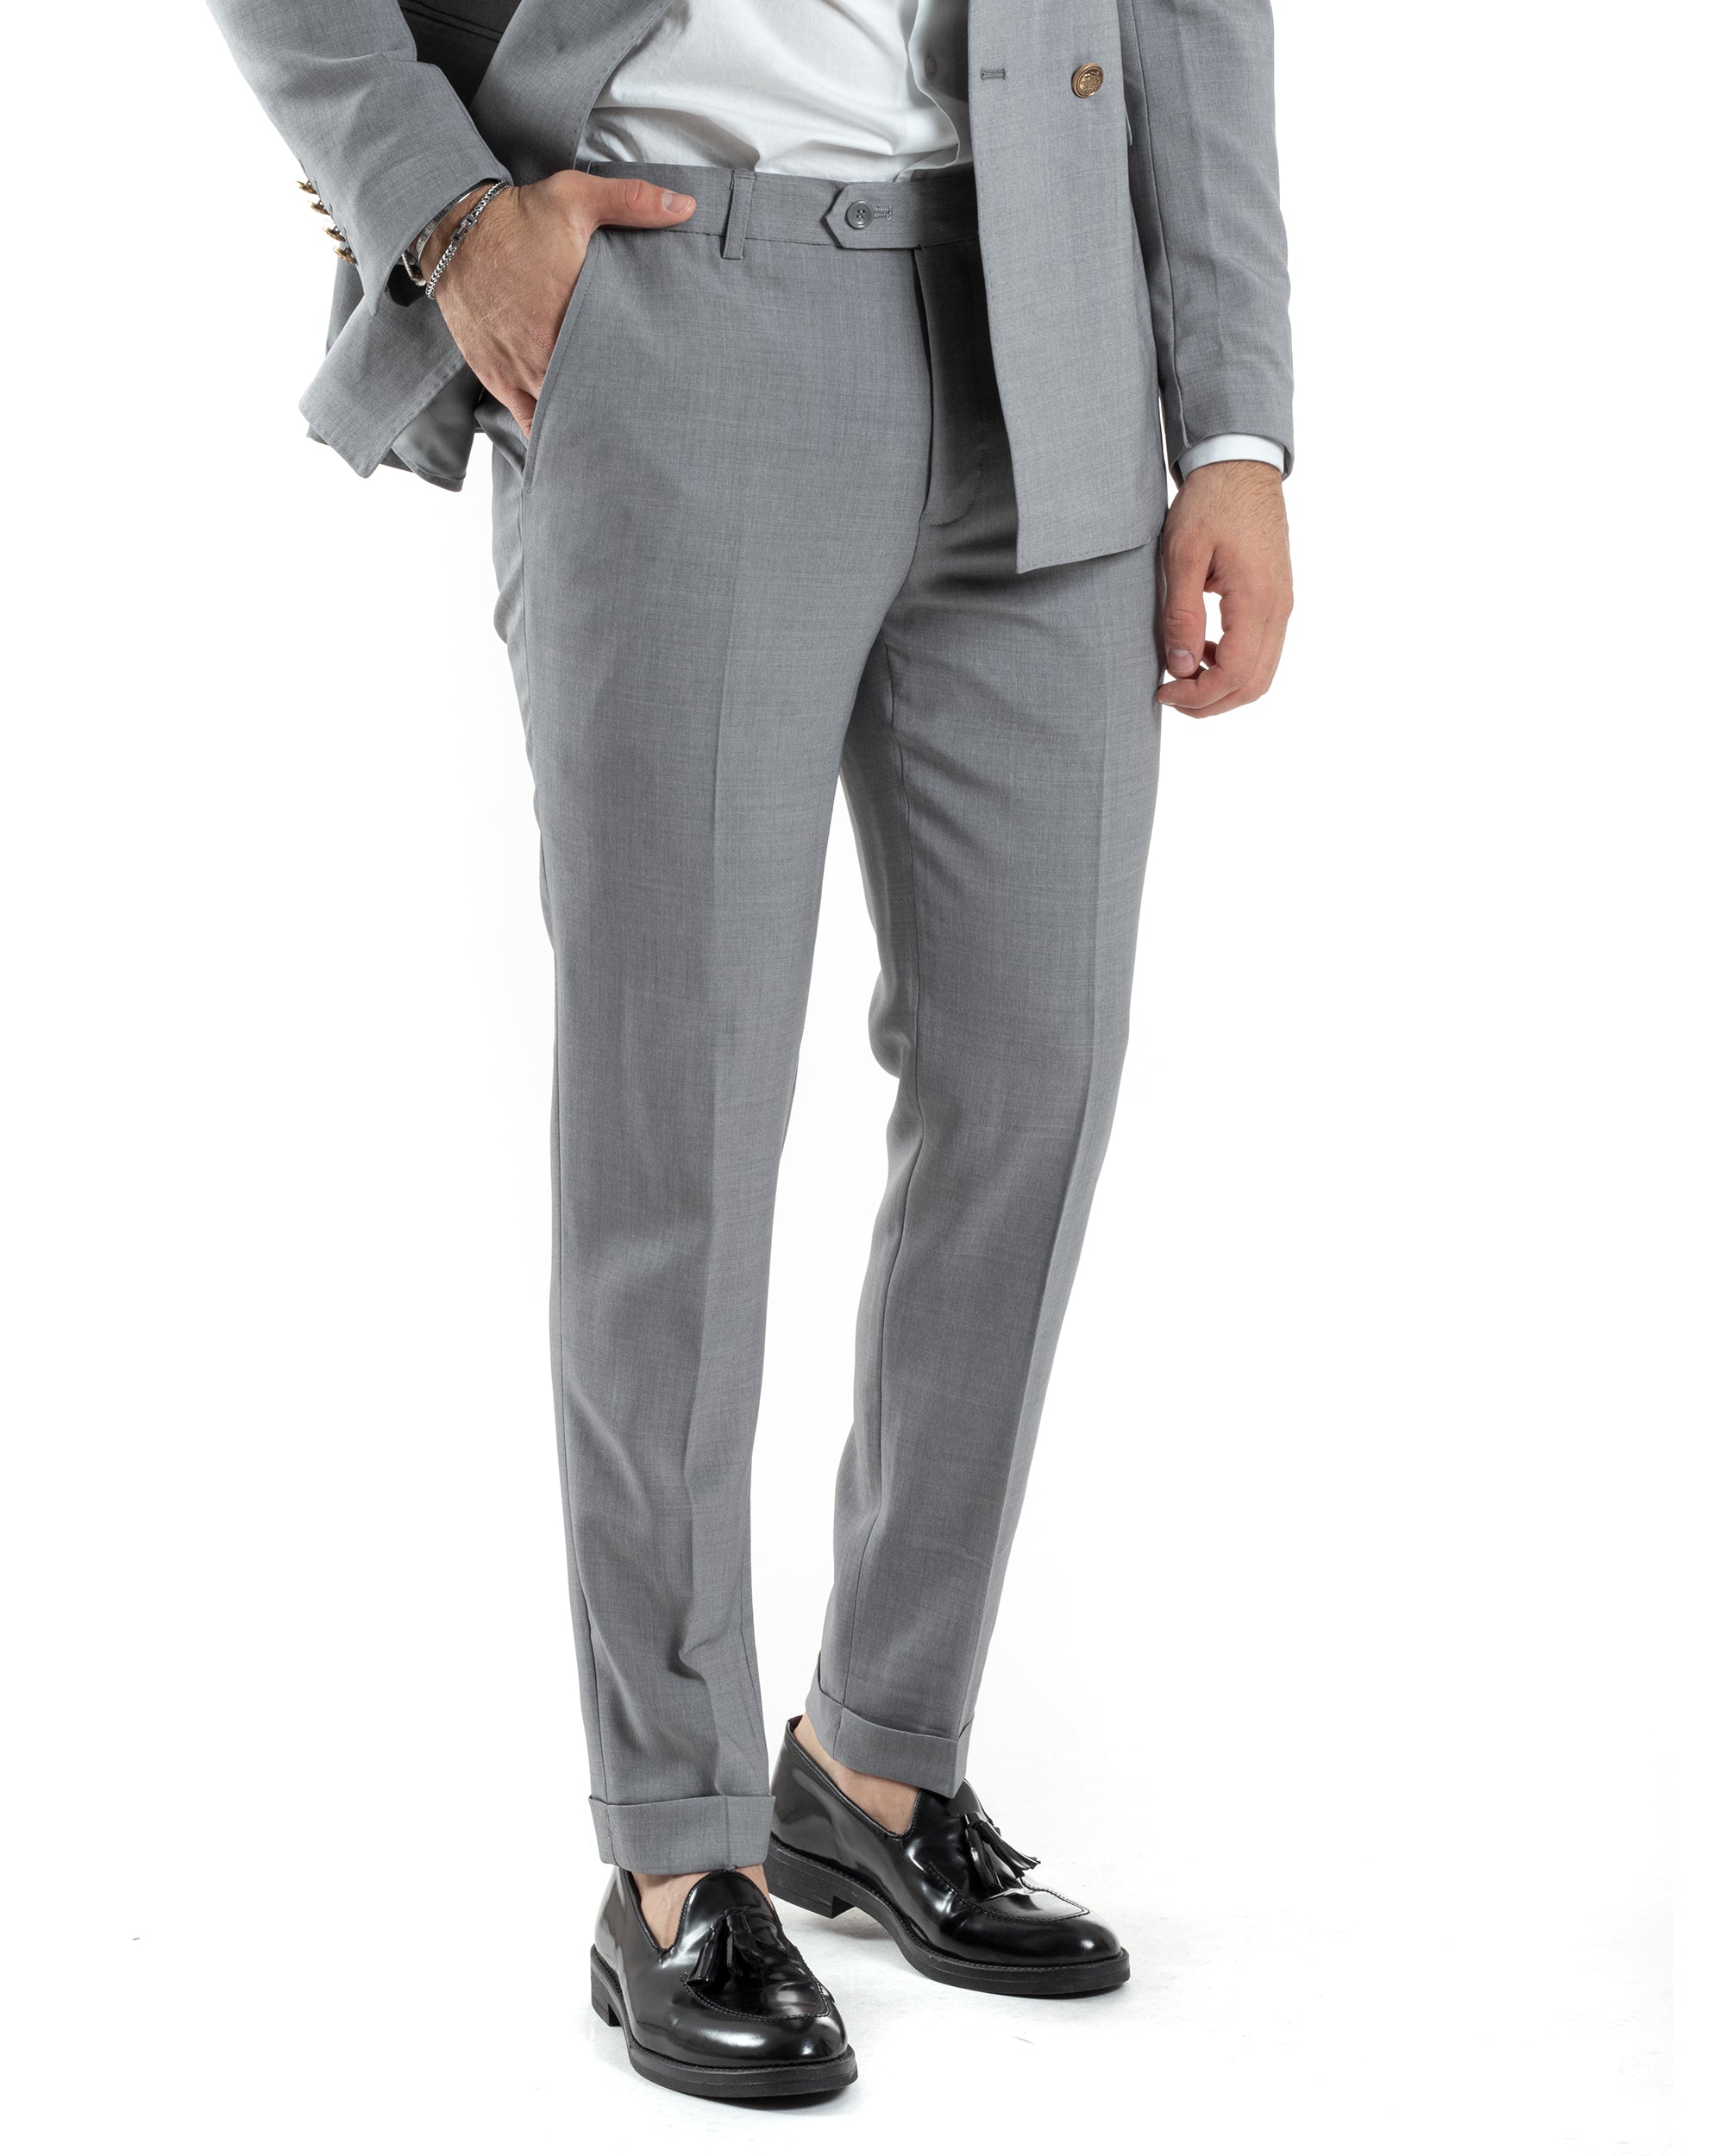 Double-Breasted Men's Suit Suit Jacket Trousers Blue Pinstripe Elegant Casual GIOSAL-OU2404A